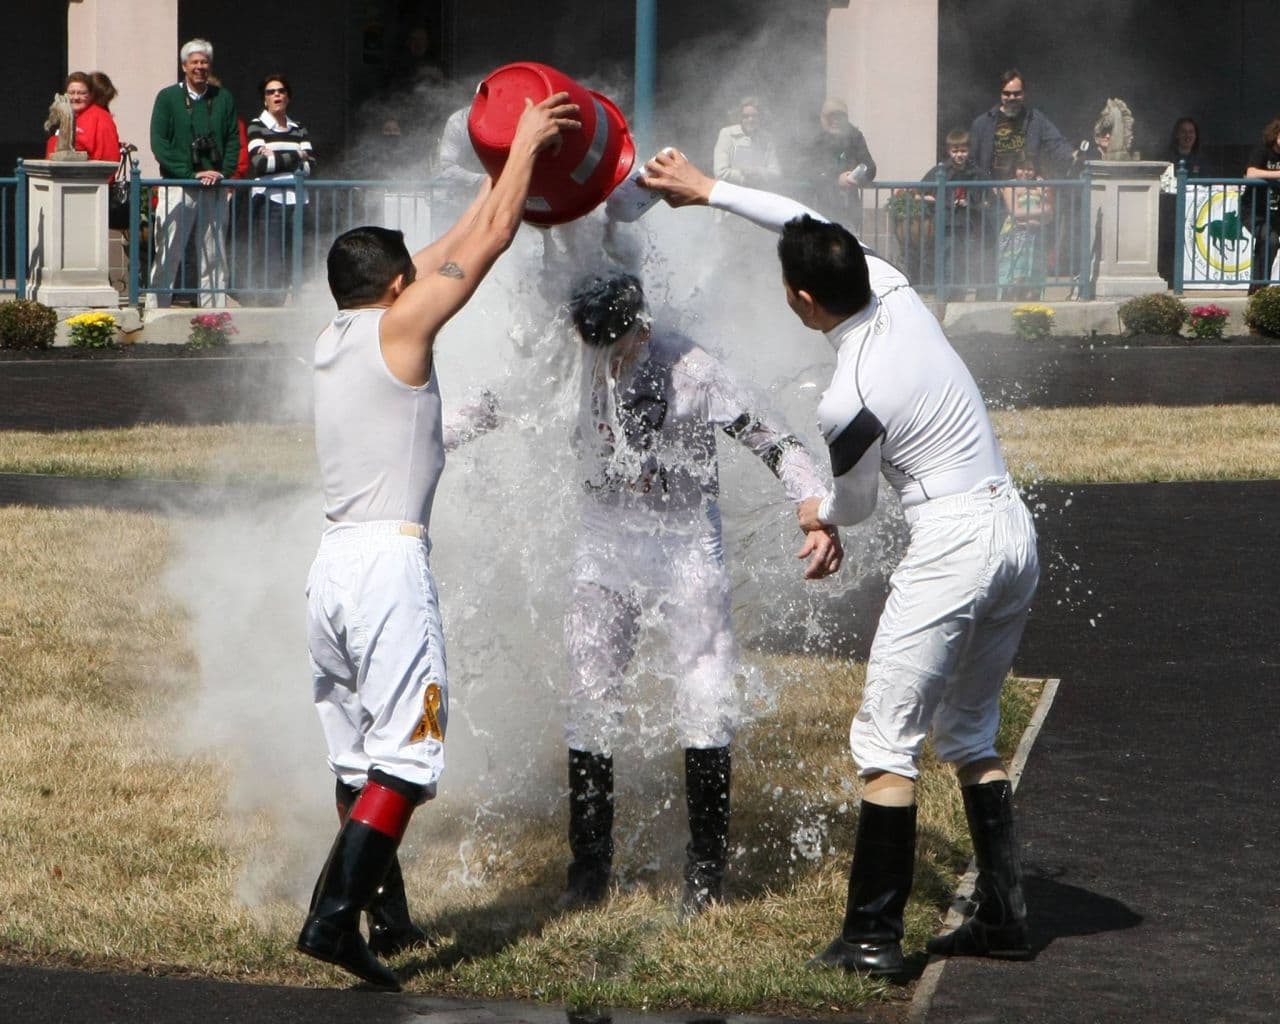 Two fellow jockeys dump a bucket of water on Richard after he notched his first U.S. win this spring. (Clementine Oliver)